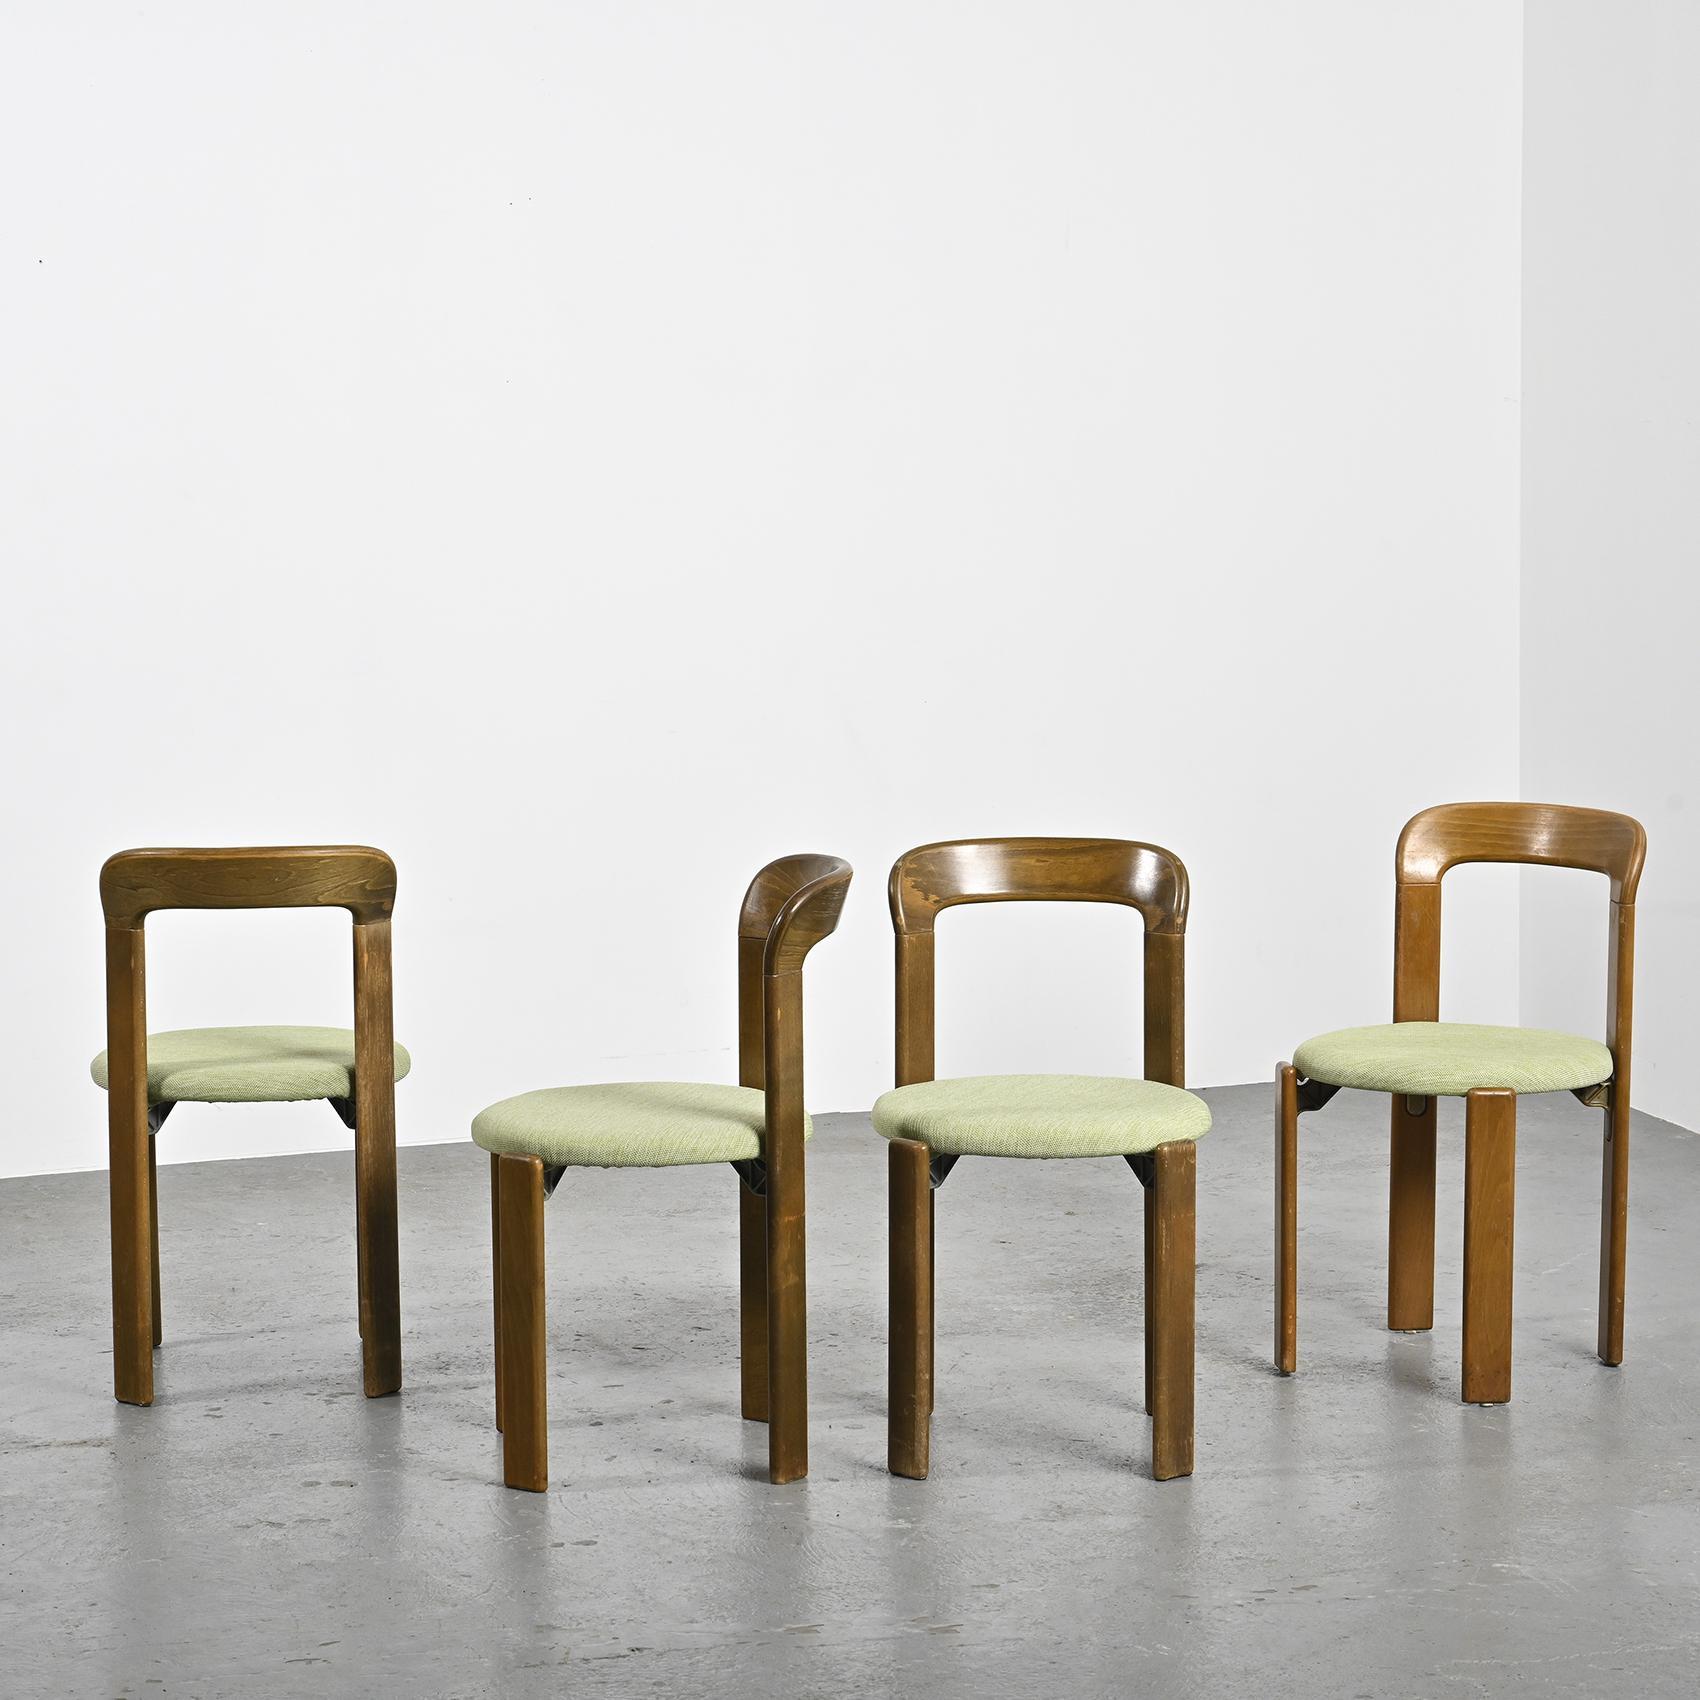 Set of four chairs, 